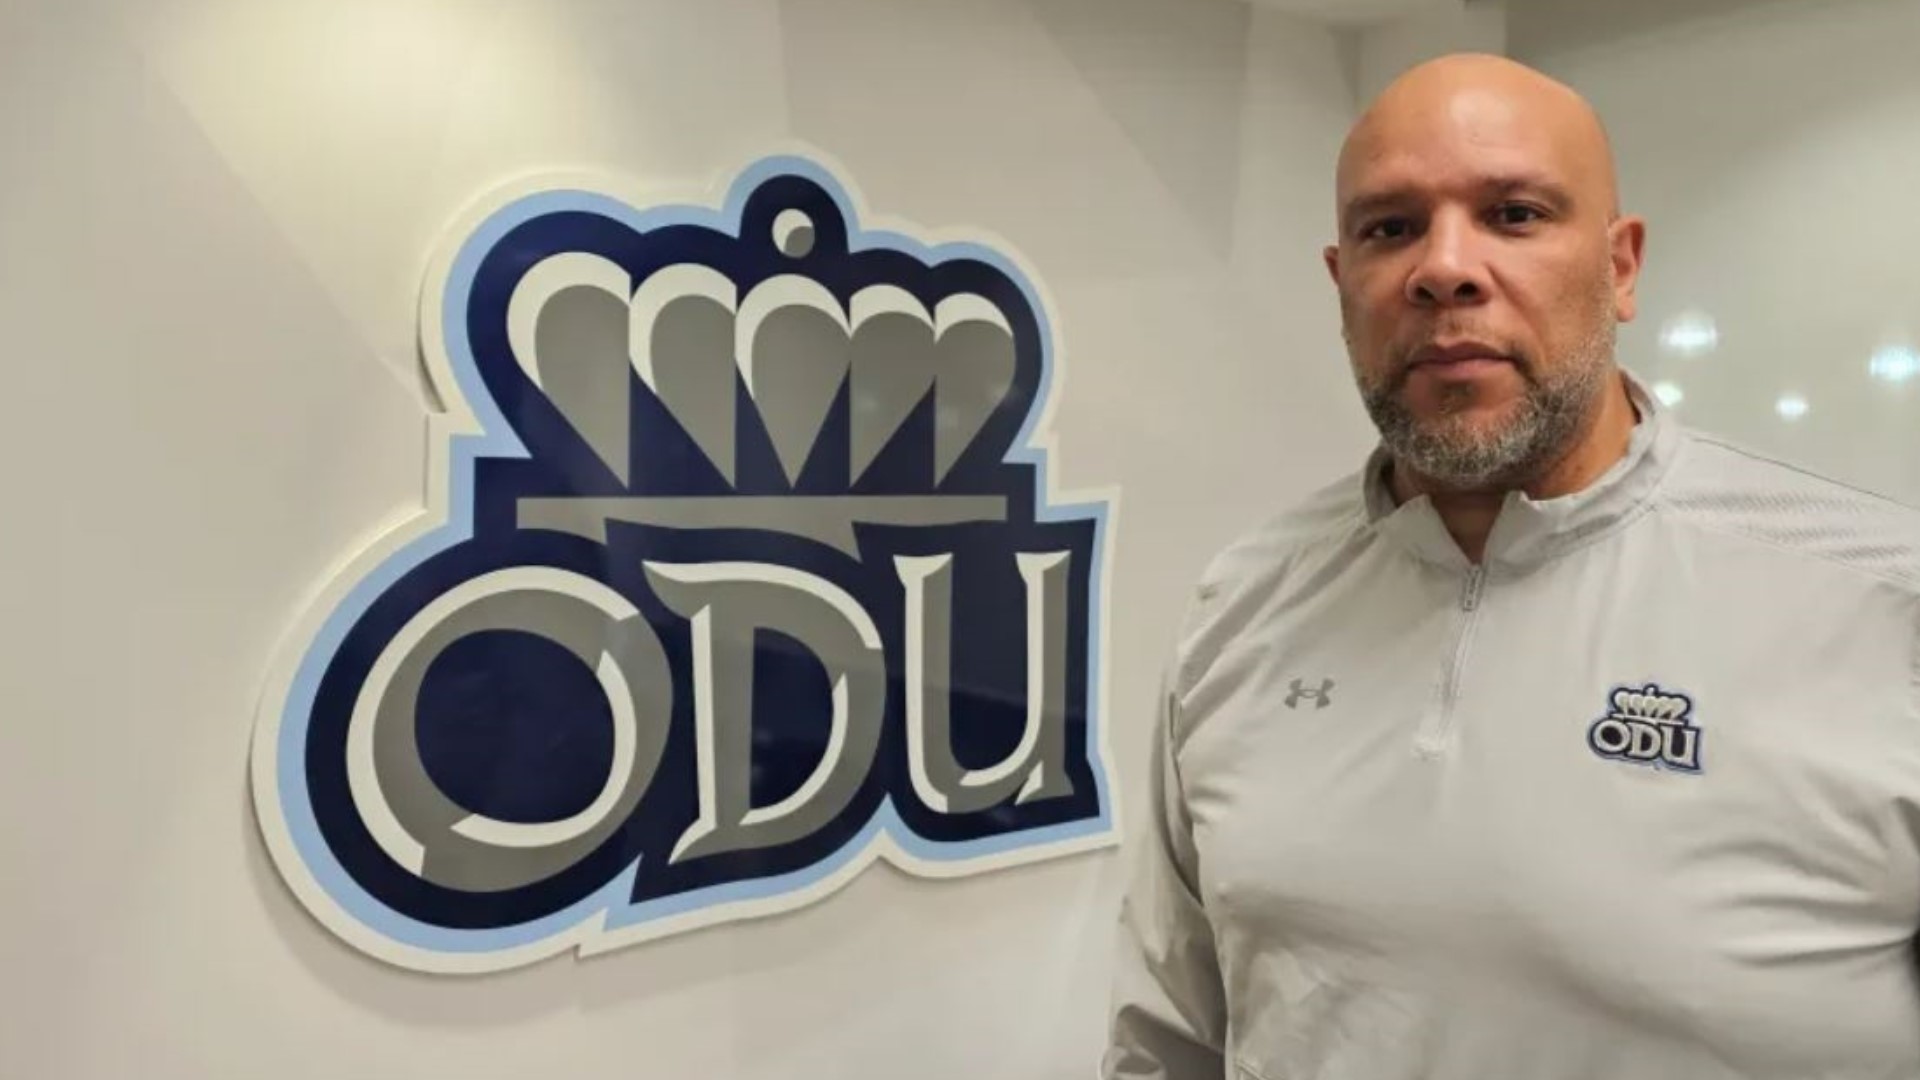 Finishing his career at ODU in 1997, Hodge recorded 2,117 points and 1,086 rebounds.